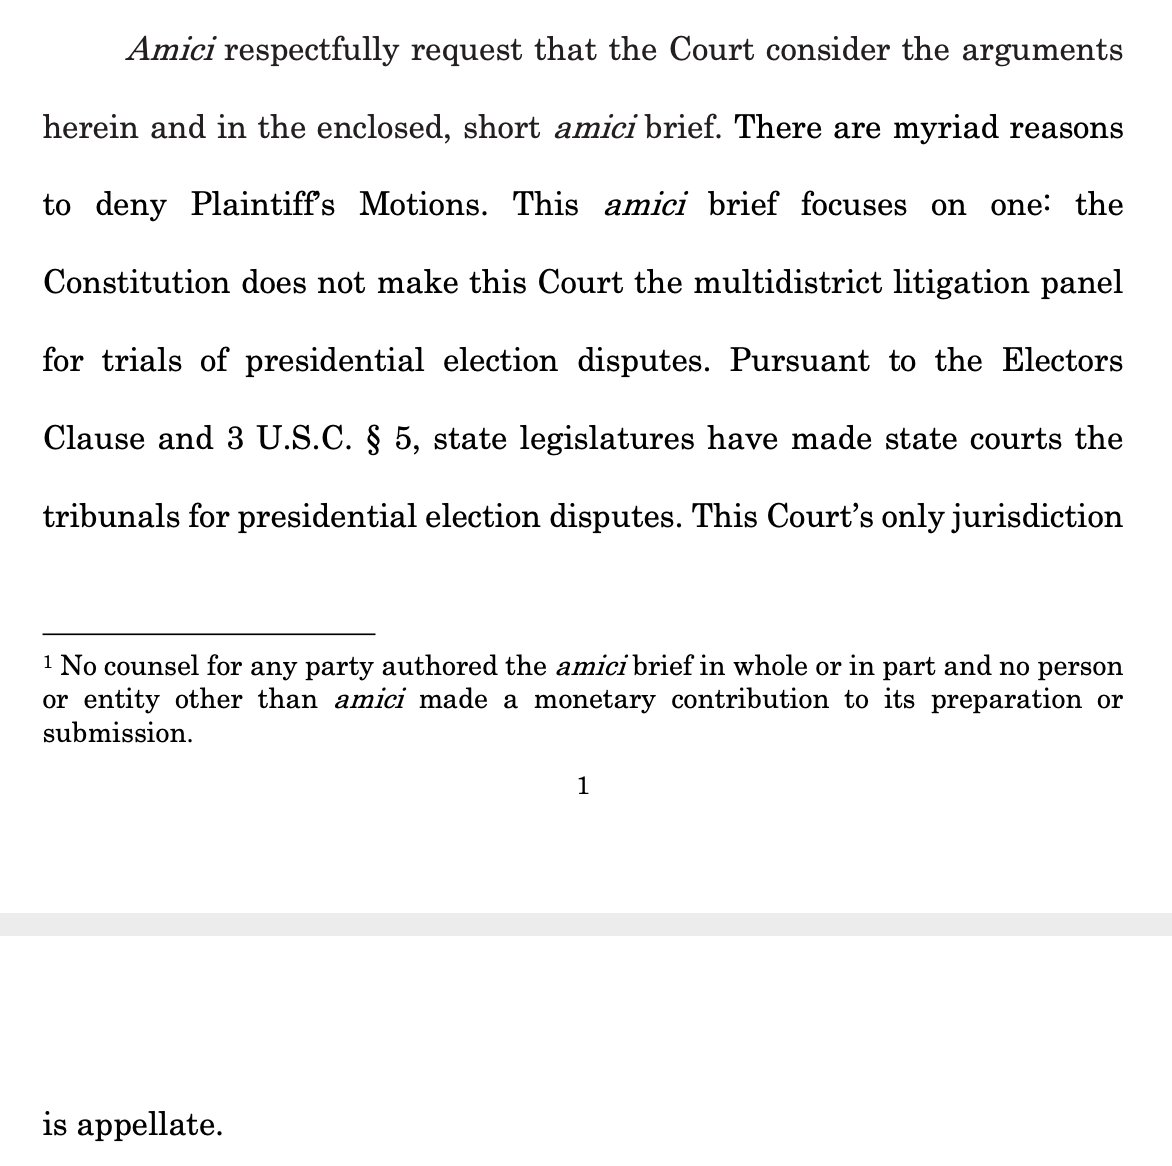 In addition to Trump's filing (more on that) in the Texas case, there were 3 other submissions today. Amusingly, each was presented in a different way. The Carter Phillips et al., filing, unsurprisingly, got it together correctly — and obliterates Texas.  https://www.supremecourt.gov/DocketPDF/22/22O155/163215/20201209144840609_2020-12-09%20-%20Texas%20v.%20Pennsylvania%20-%20Amicus%20Brief%20of%20Missouri%20et%20al.%20-%20Final%20with%20Tables.pdf